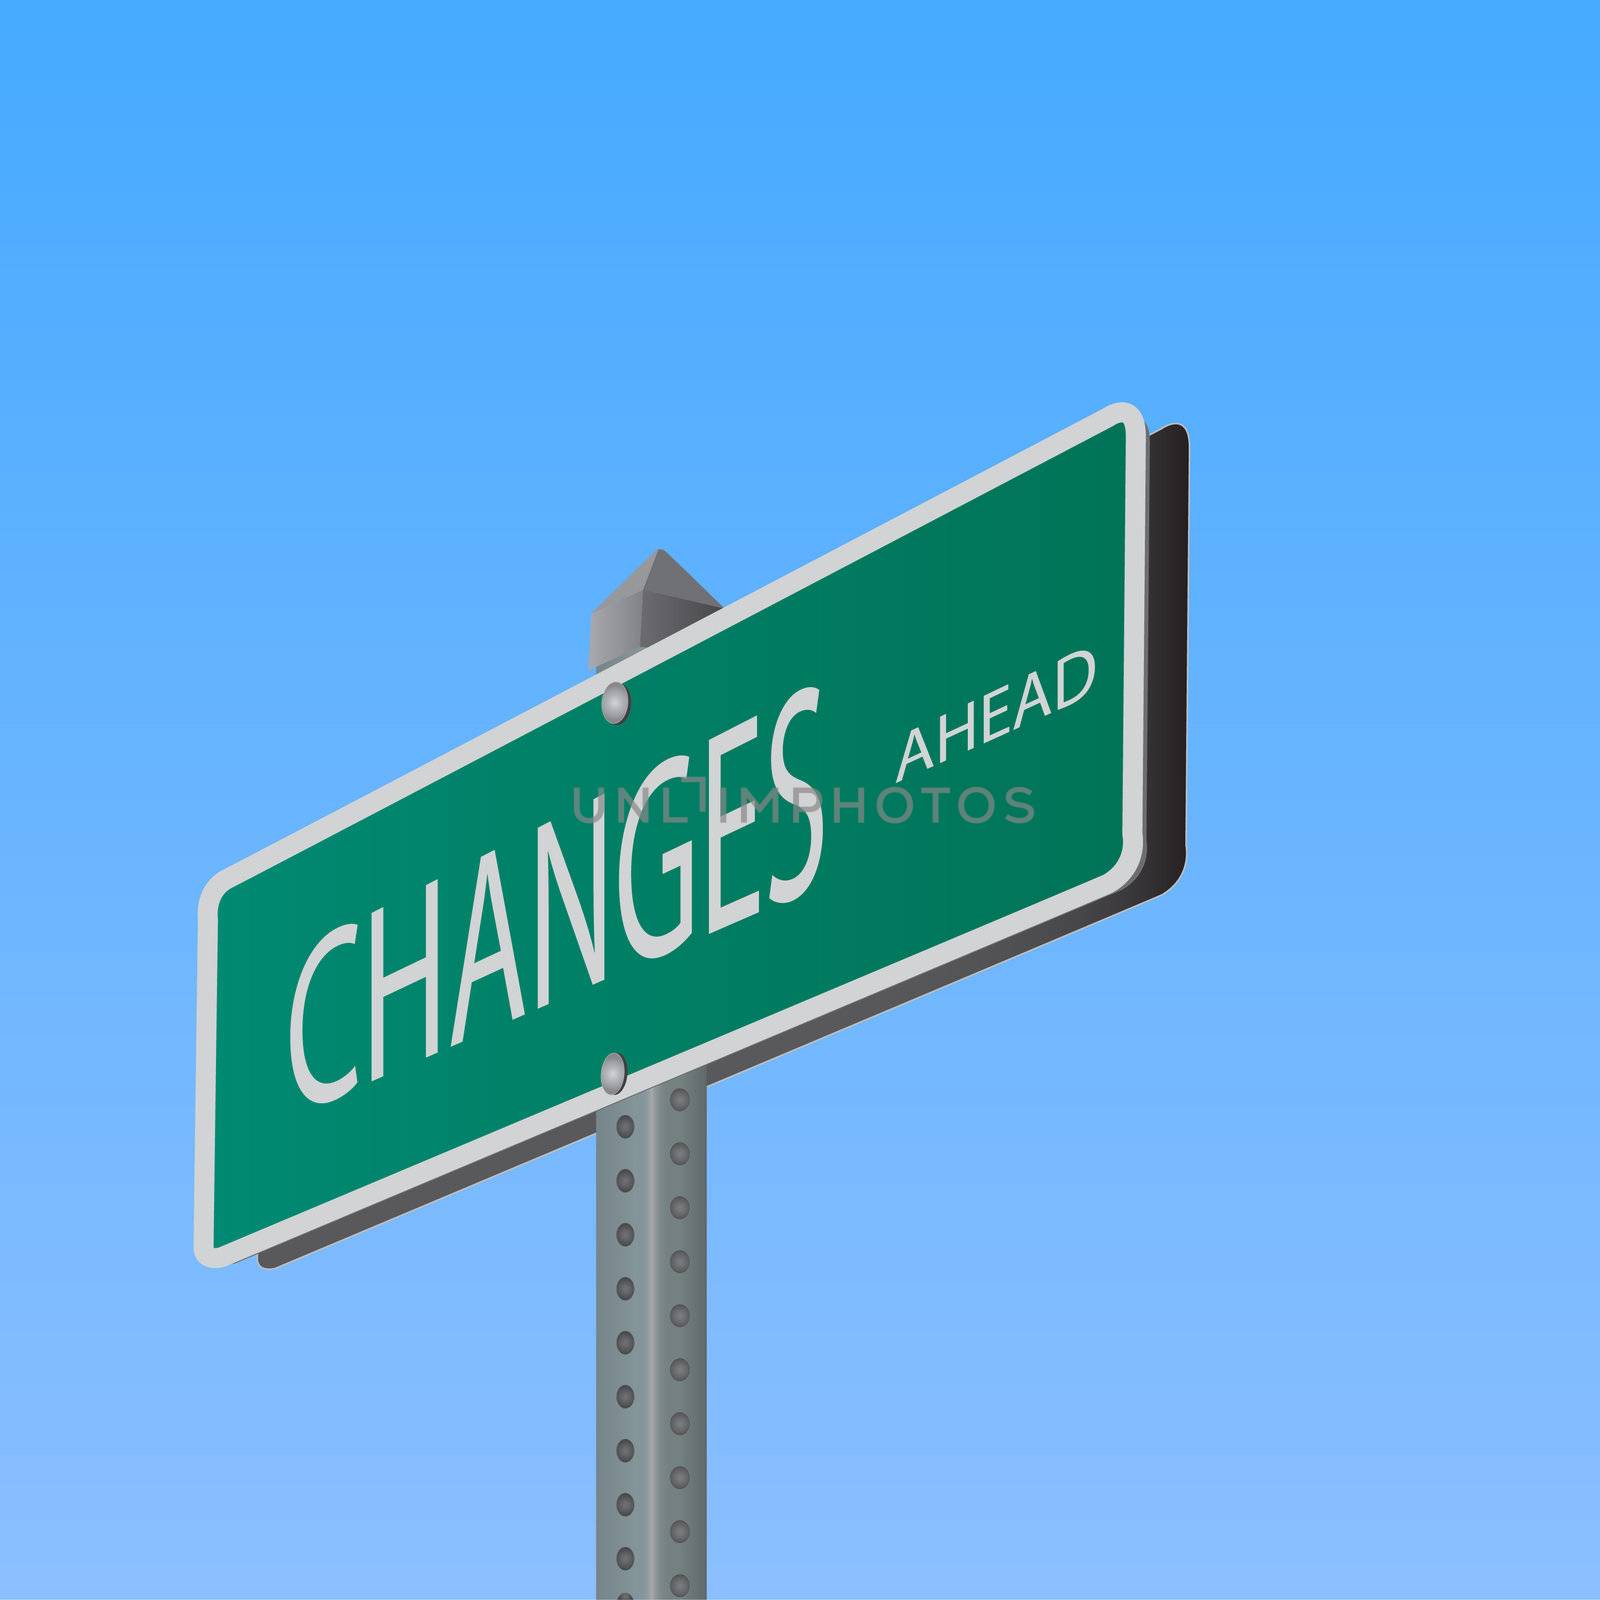 Image of a street sign to "Changes" against a blue sky background.